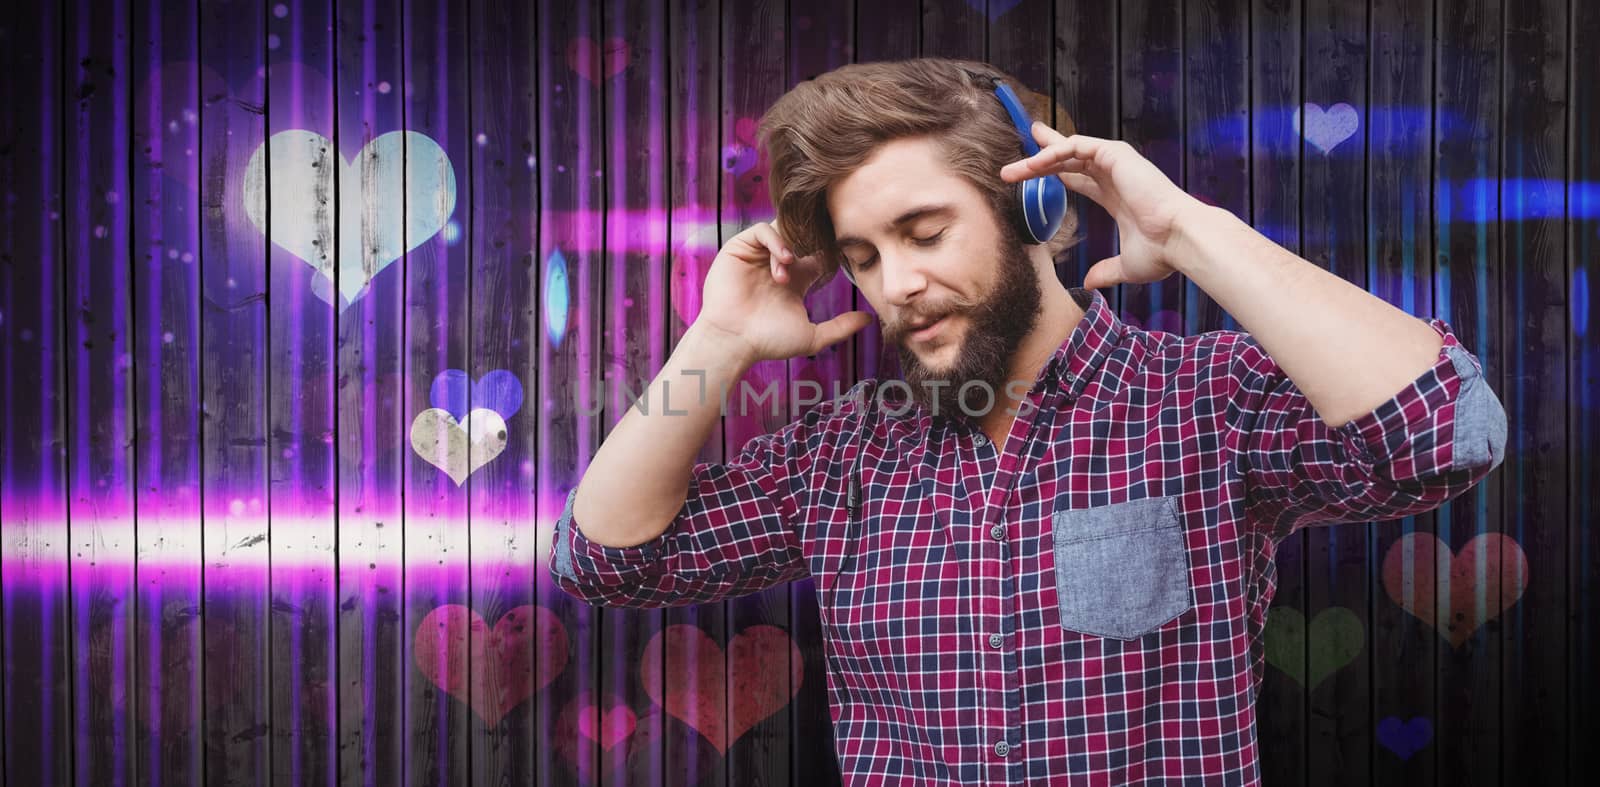 Hipster wearing headphones against wooden planks background